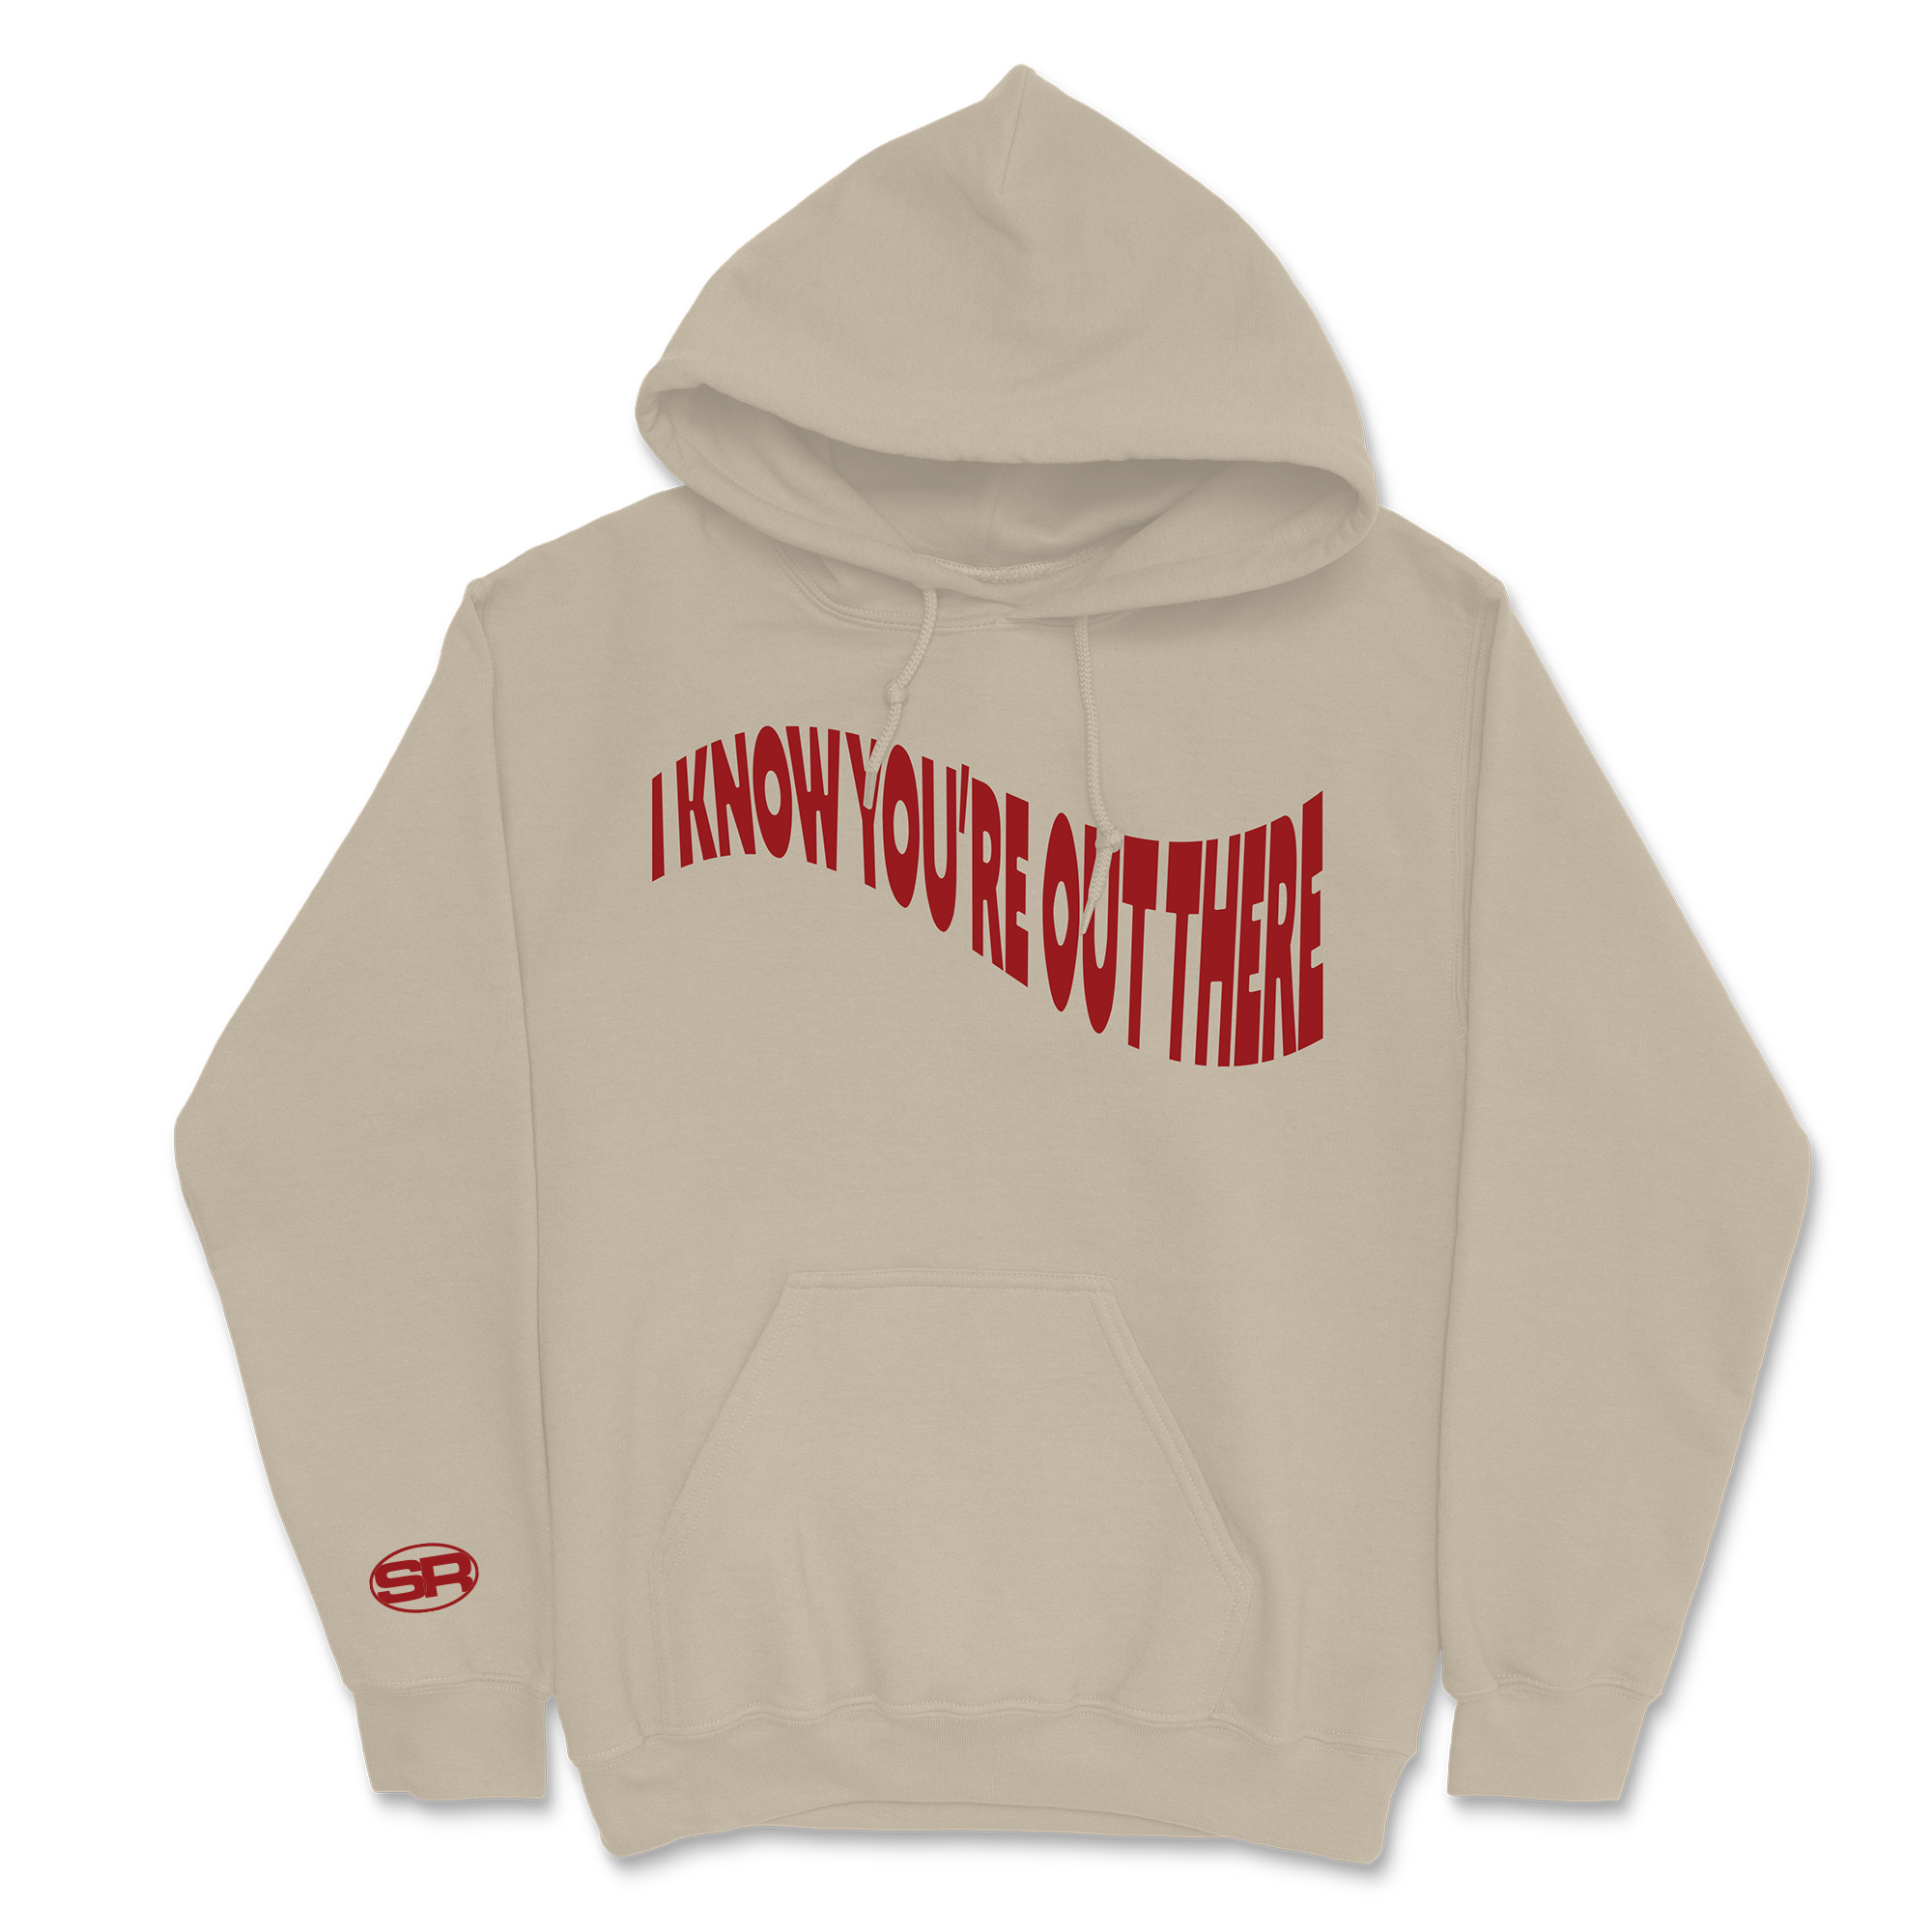 Sicily Rose - Out There Hoodie